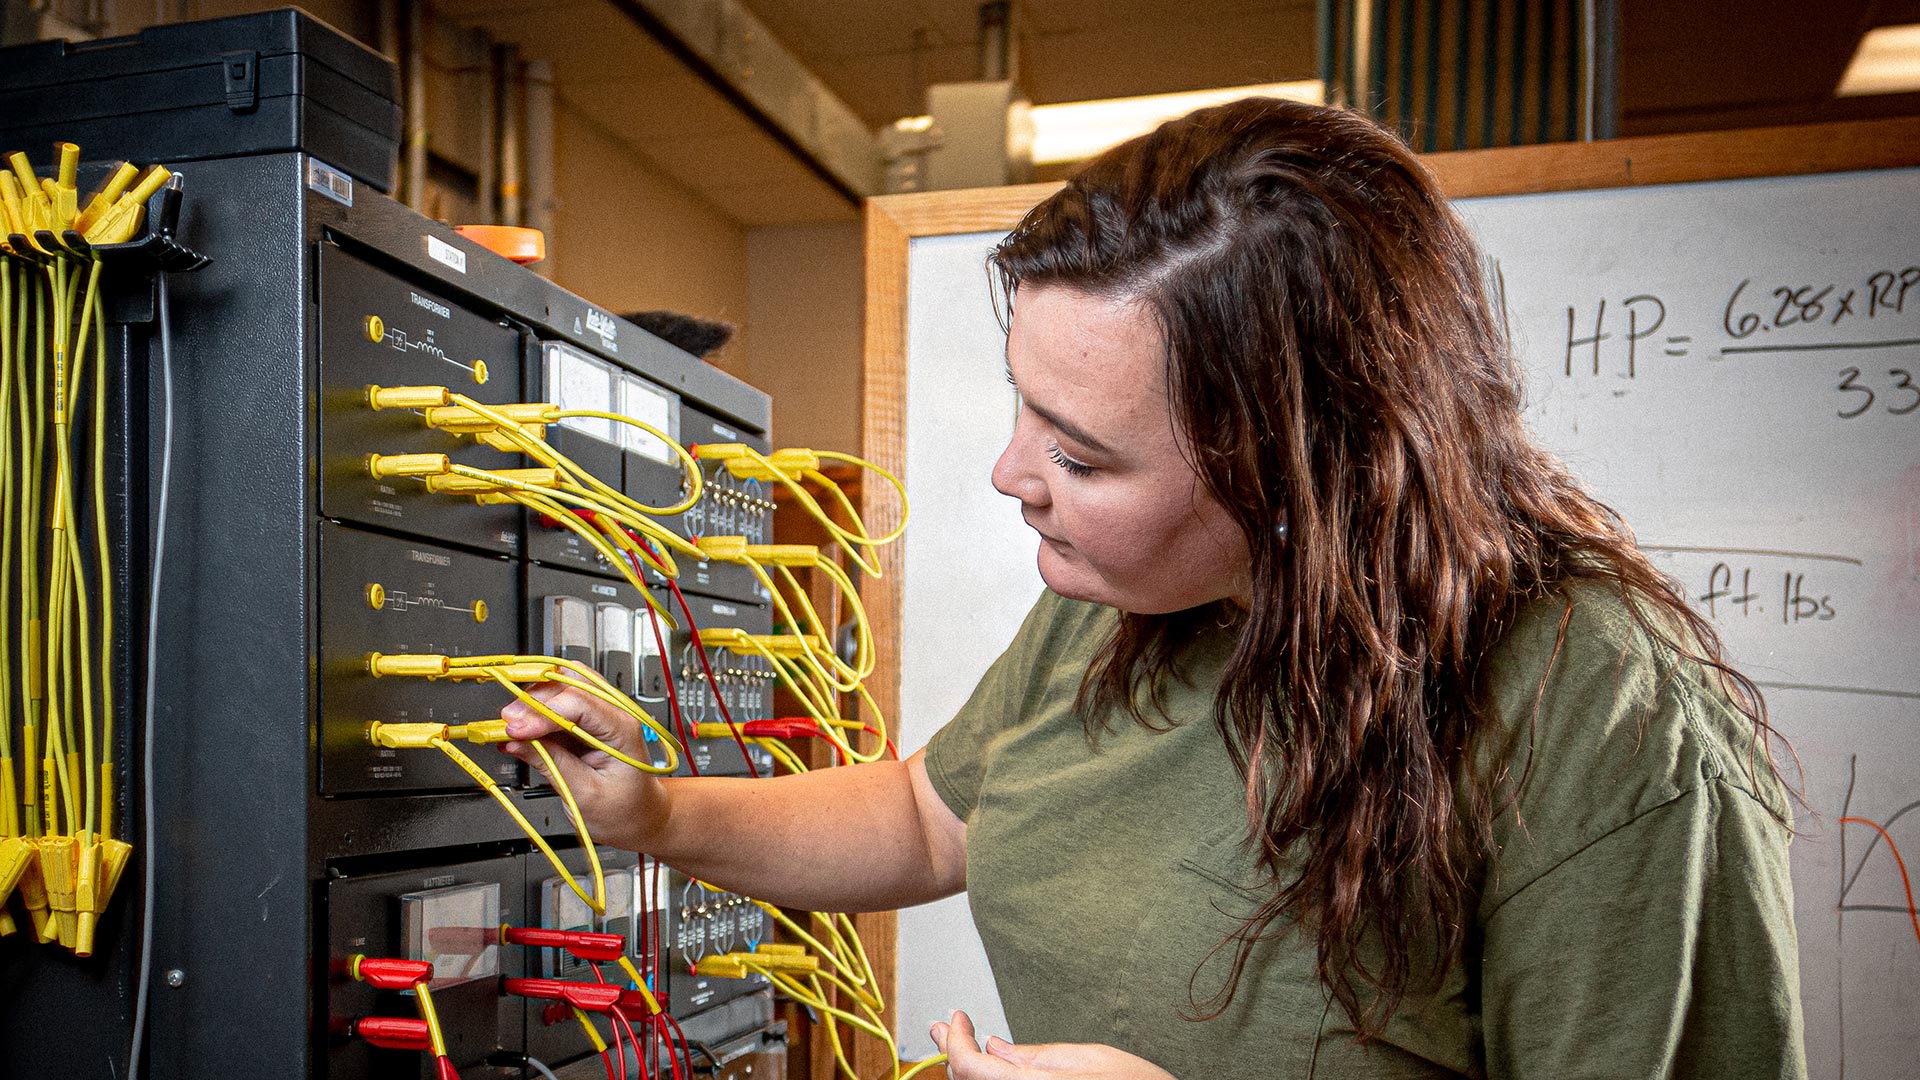 Female student plugging in cable for electrical construction